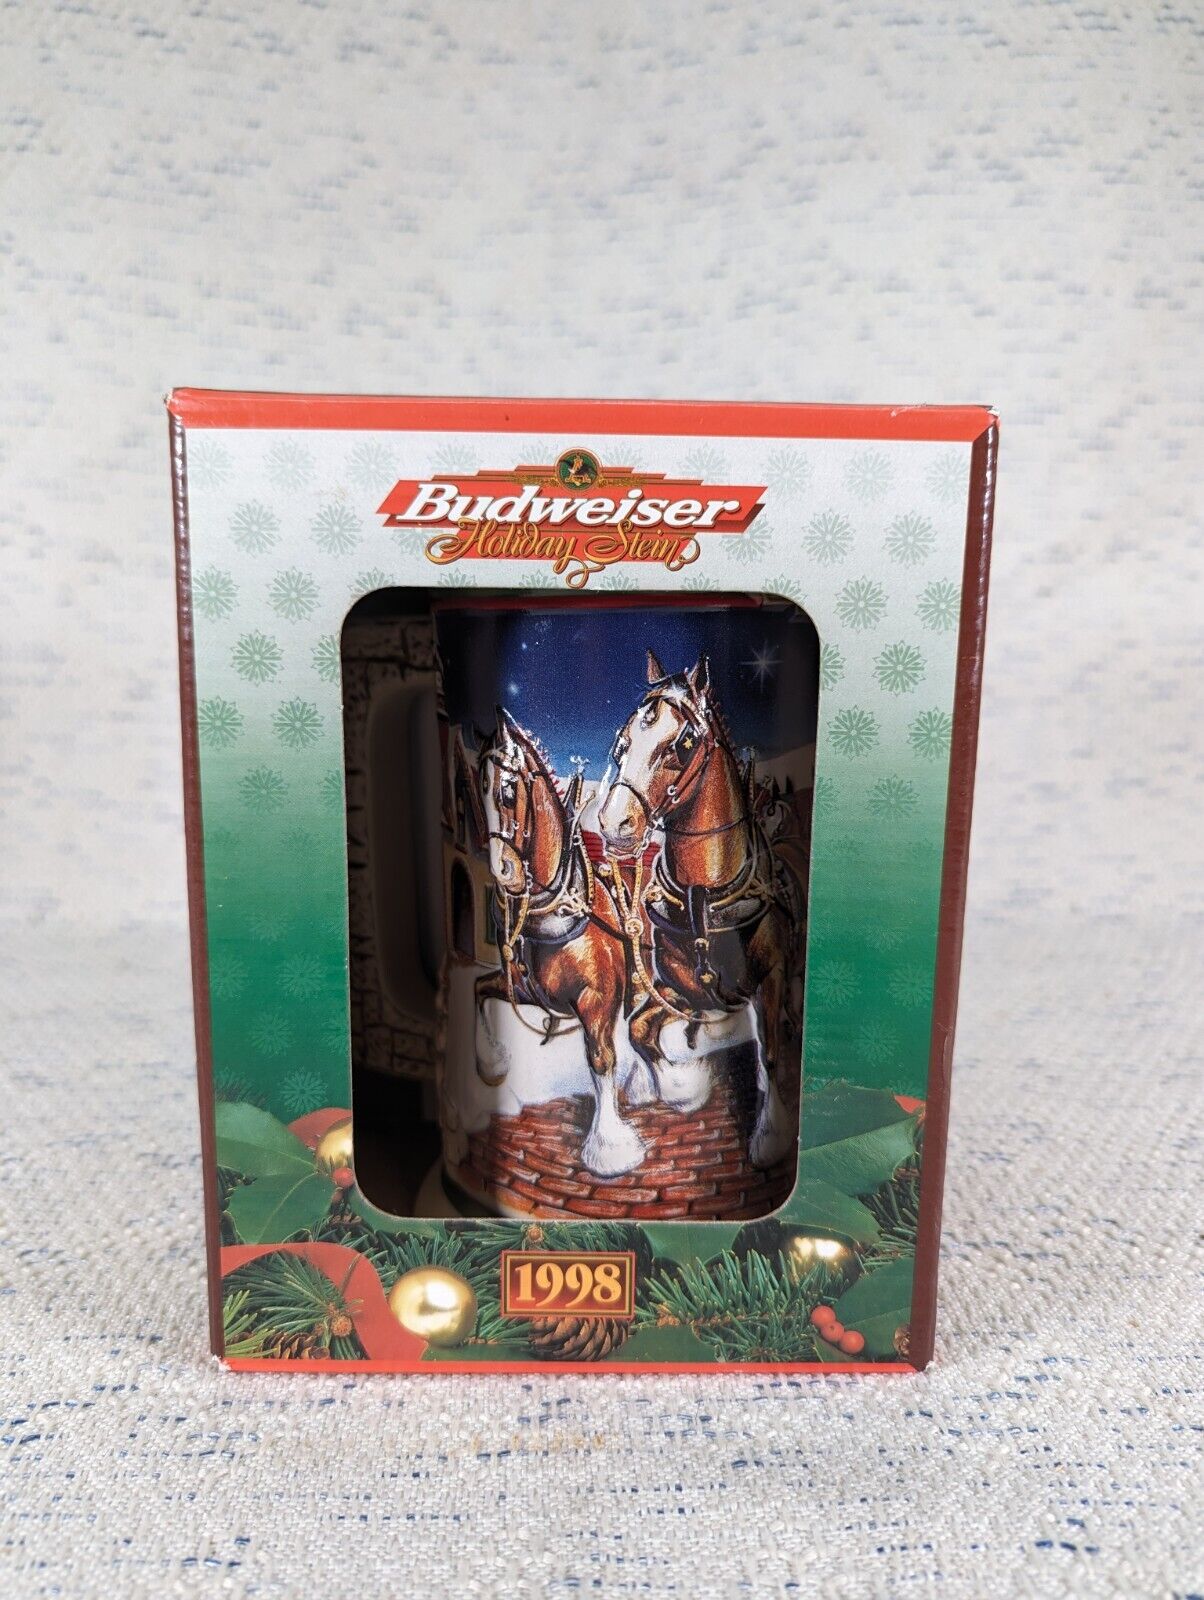 1998 Budweiser Grant’s Farm Holiday Stein – New in Box with COA